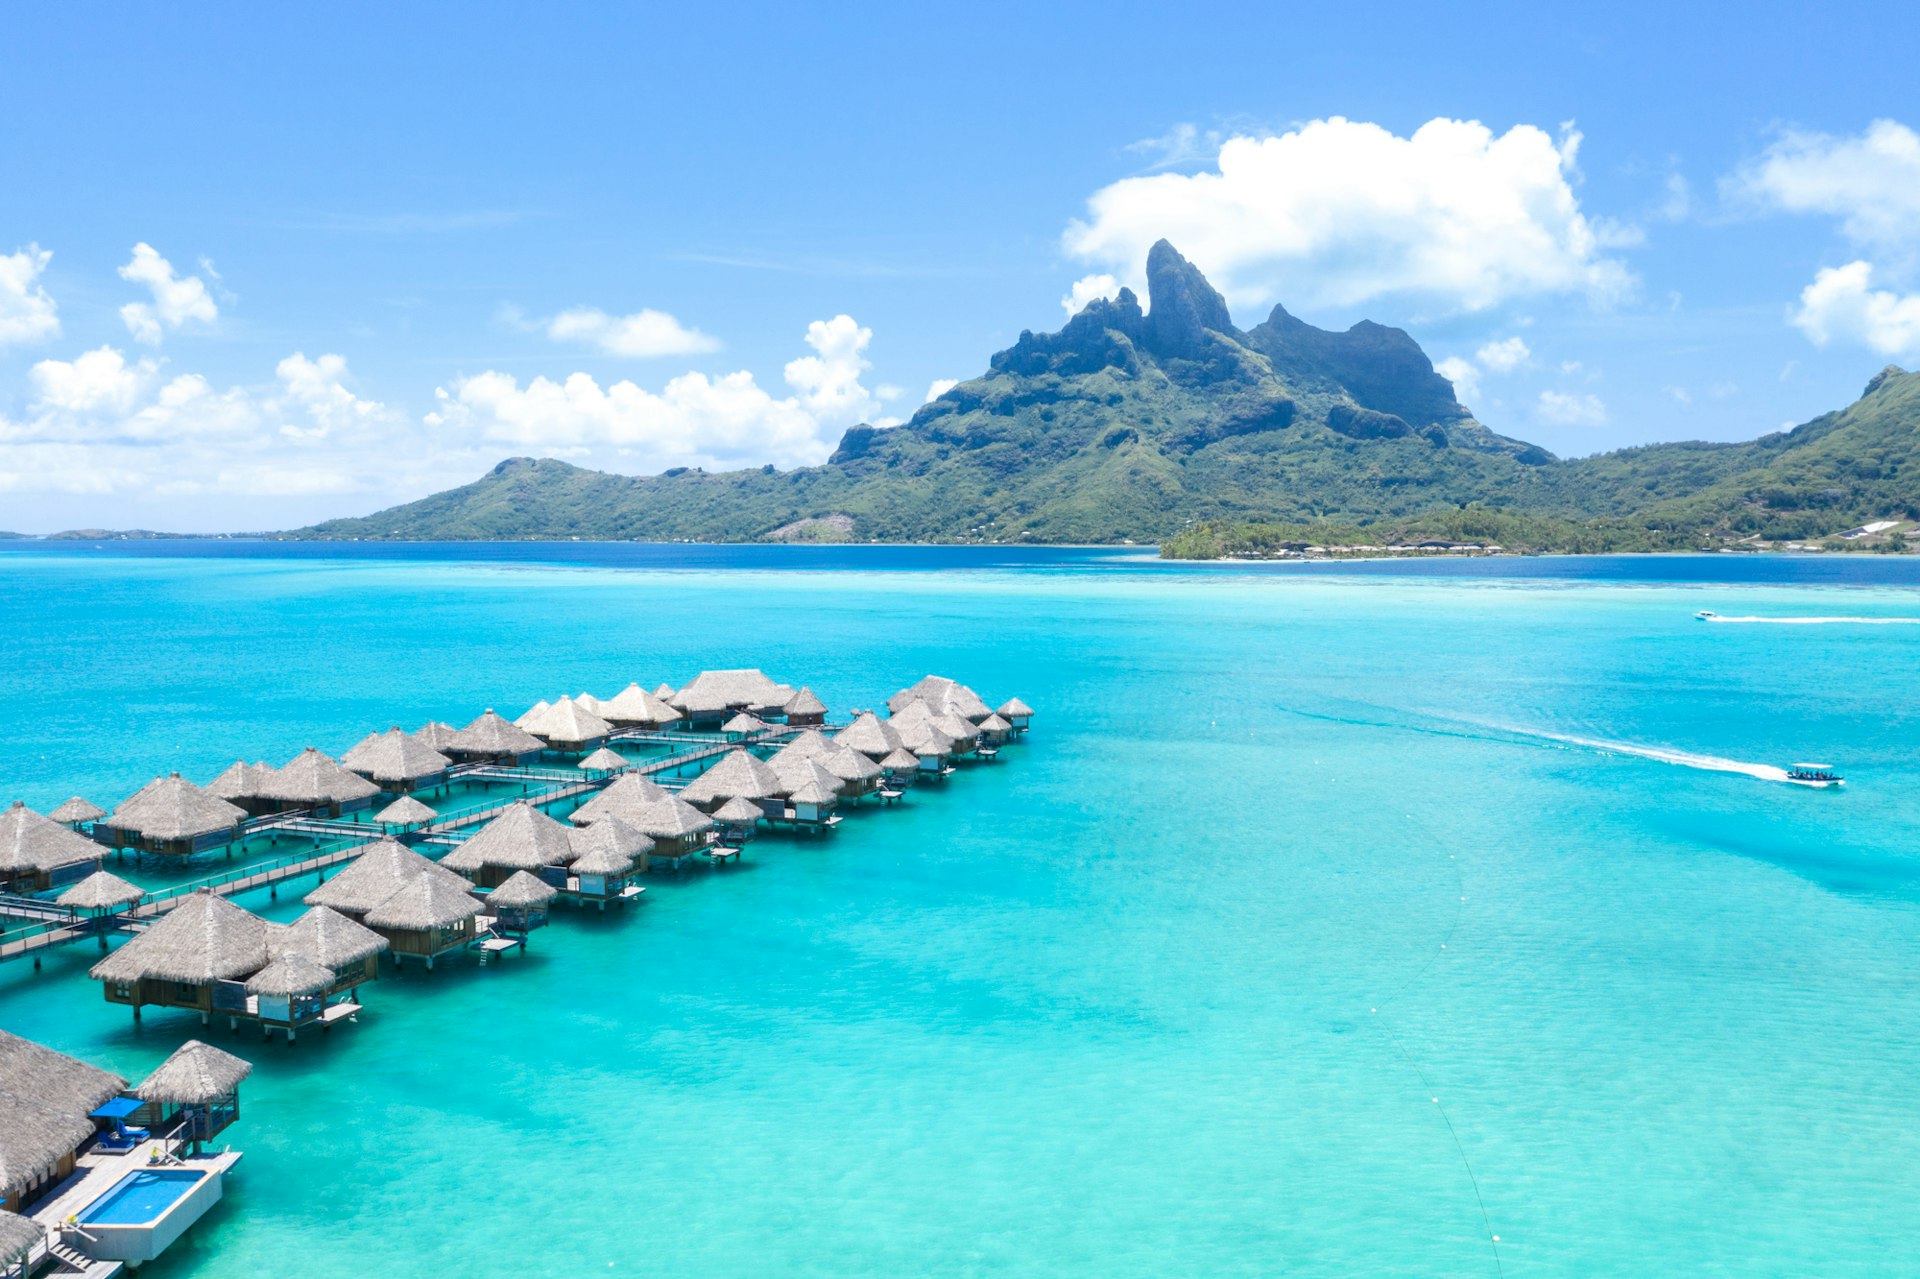 overheard view of overwater bungalows over turquoise water